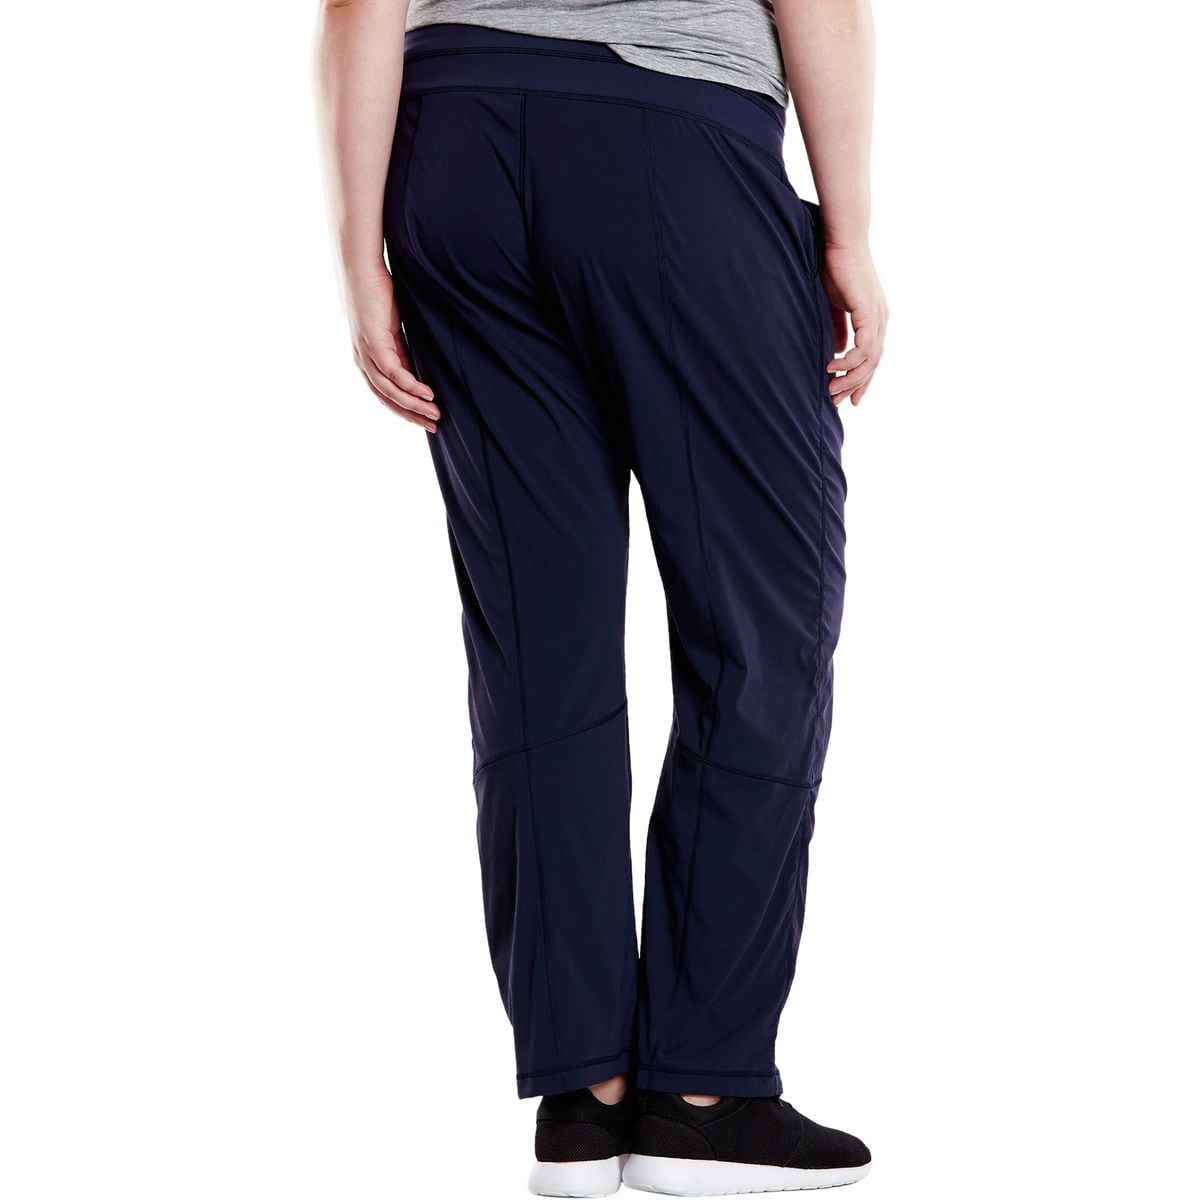 Lucy Get Going Straight Leg Pant - Women's - Clothing